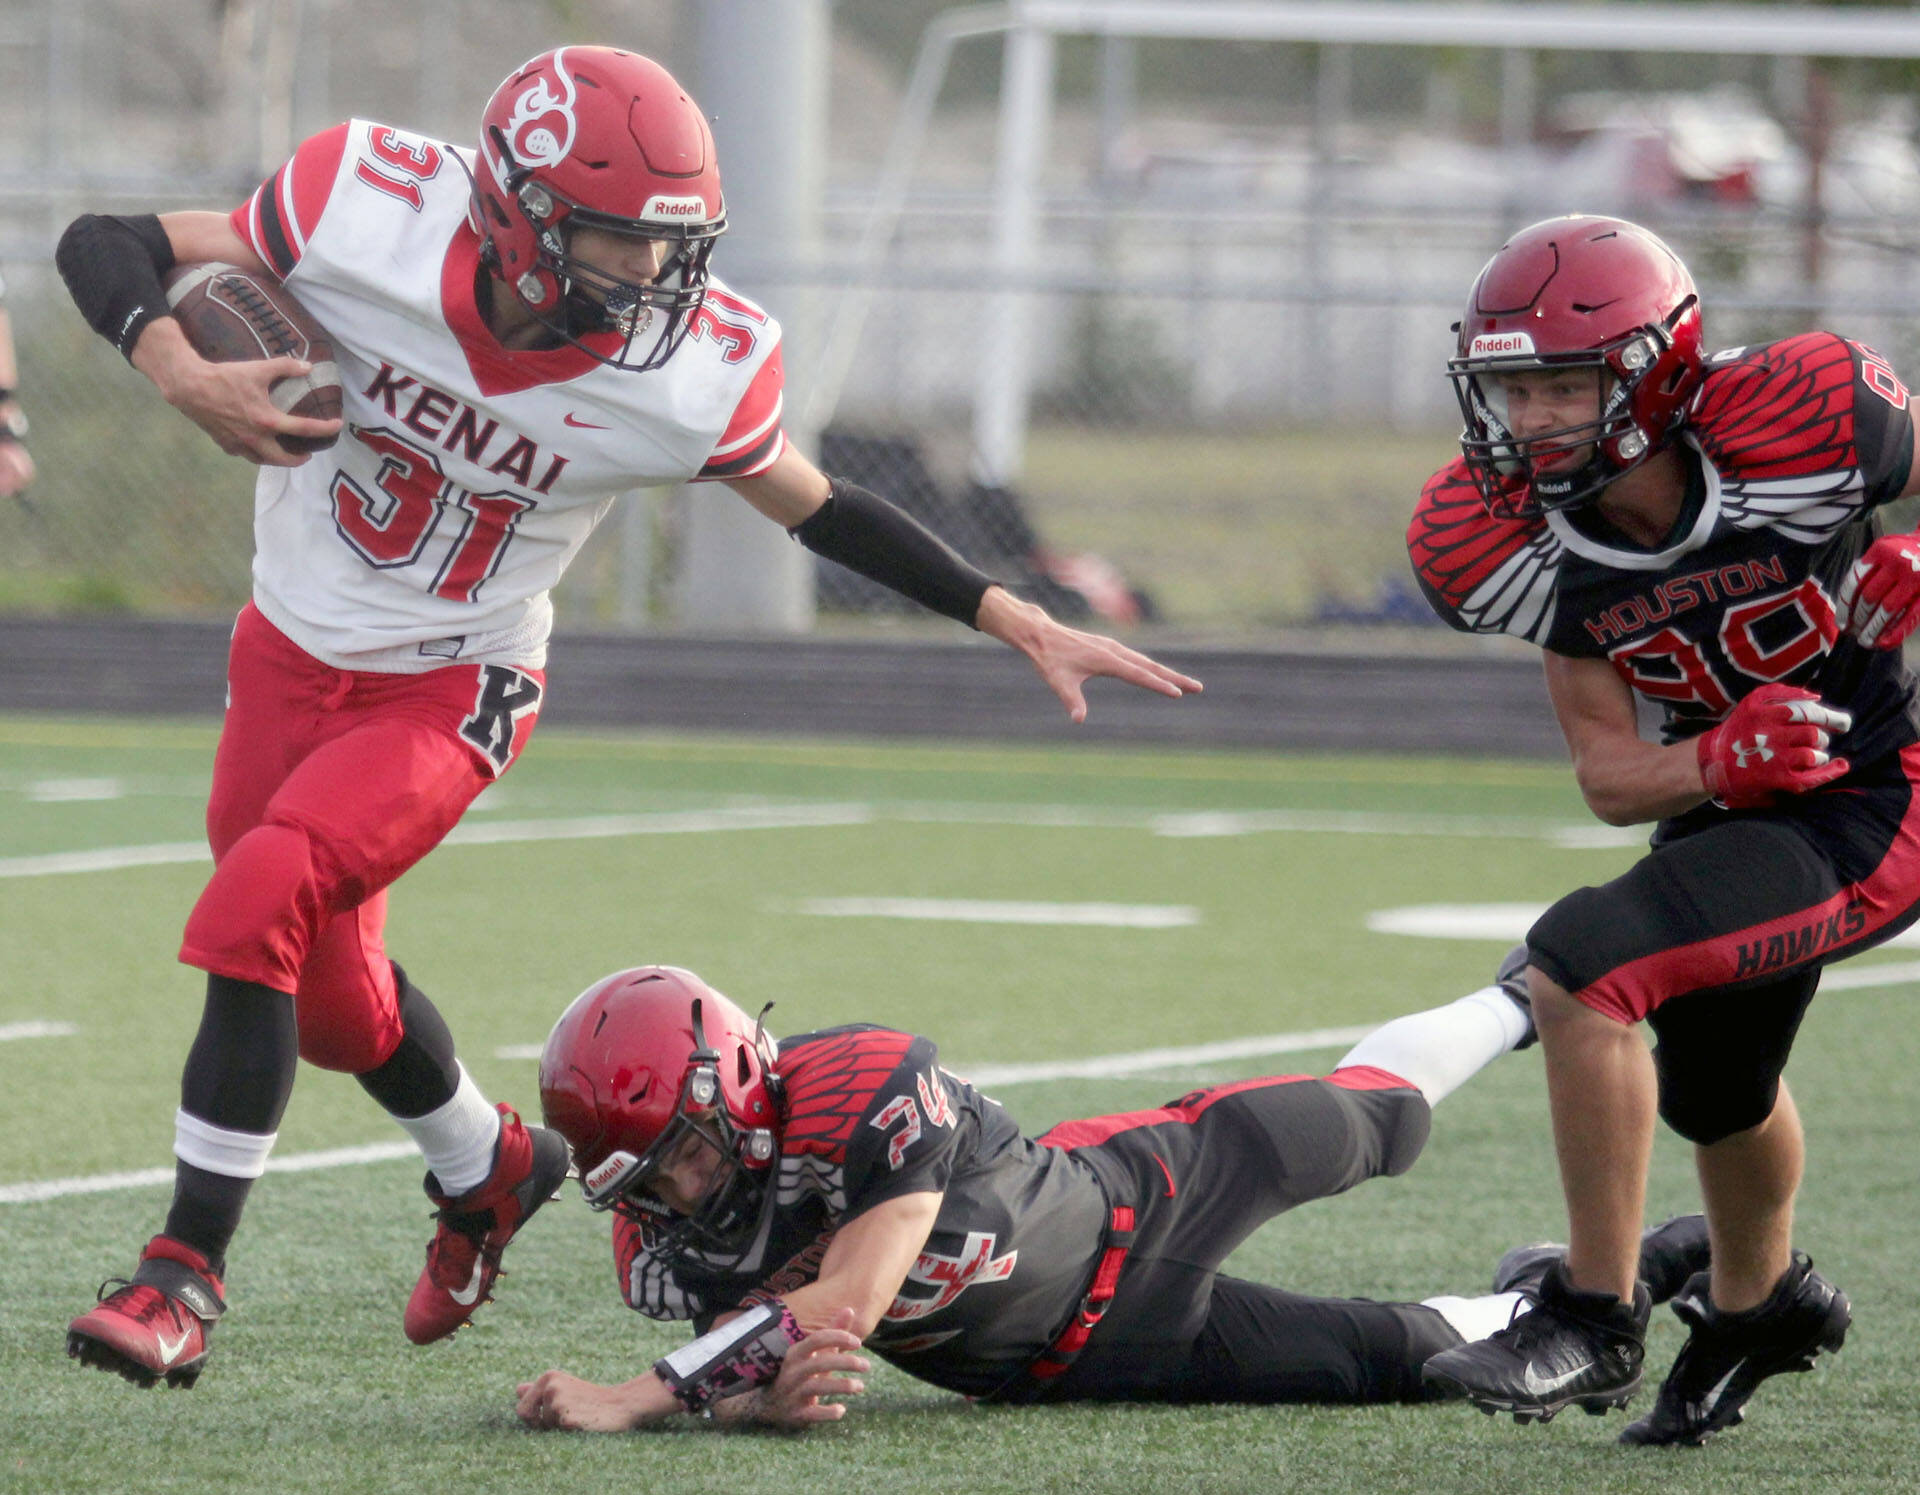 Kenai’s Levi Good tries to break outside during a 32-2 loss to the Houston Hawks on Friday, Sept. 3, 2021, in Houston, Alaska. (Photo by Jeremiah Bartz/Frontiersman)